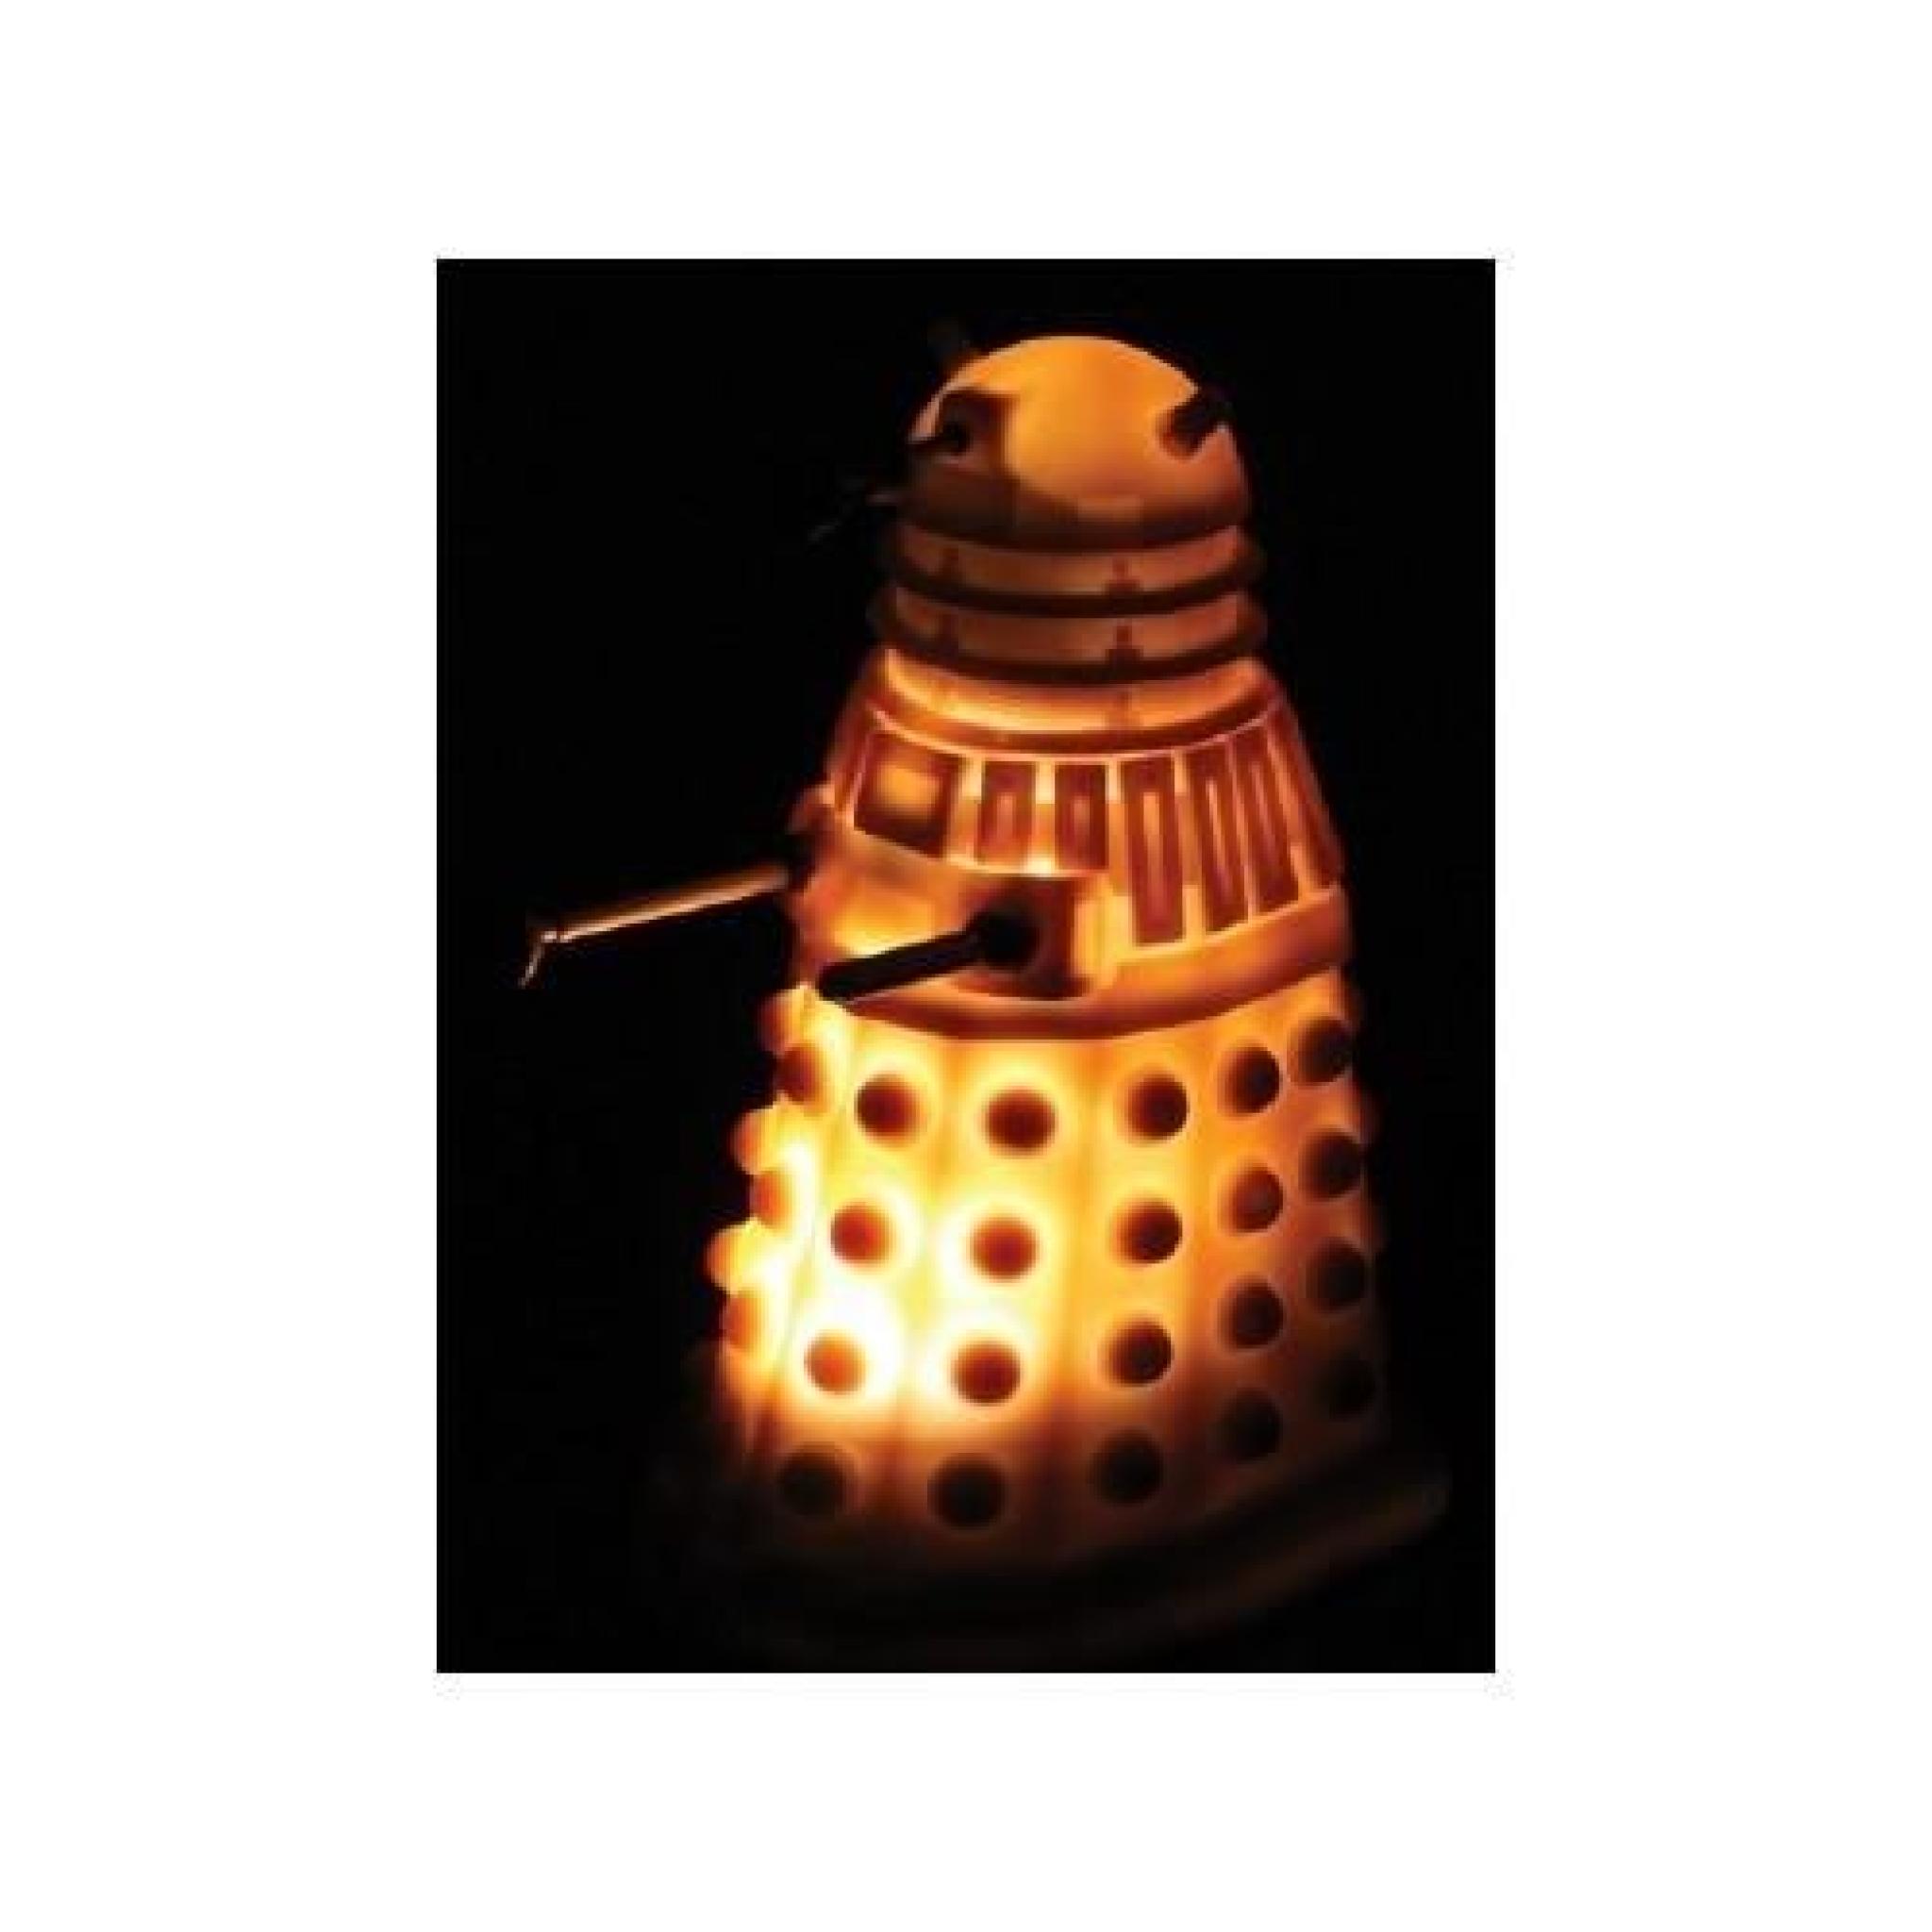 Lampe Doctor Who Dalek pas cher